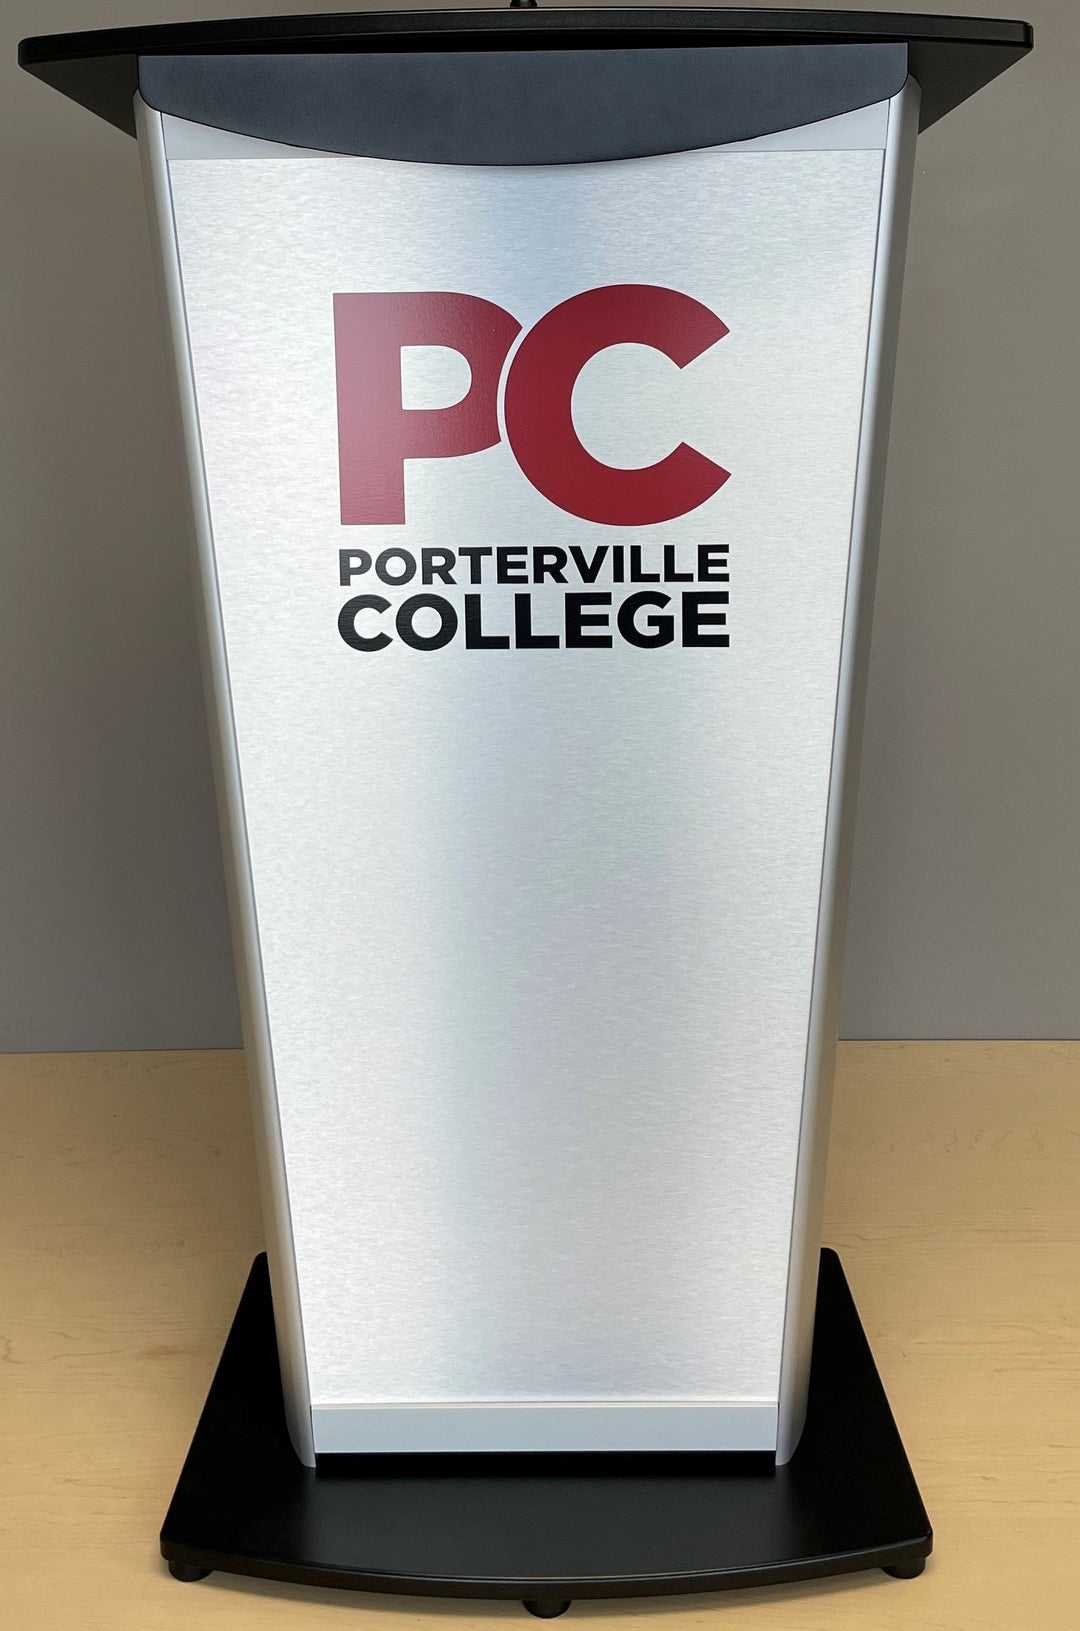 Contemporary Lecterns and Podium VH1 Standard Aluminum Lectern-Logo on Front Panel-Contemporary Lecterns and Podiums-Podiums Direct